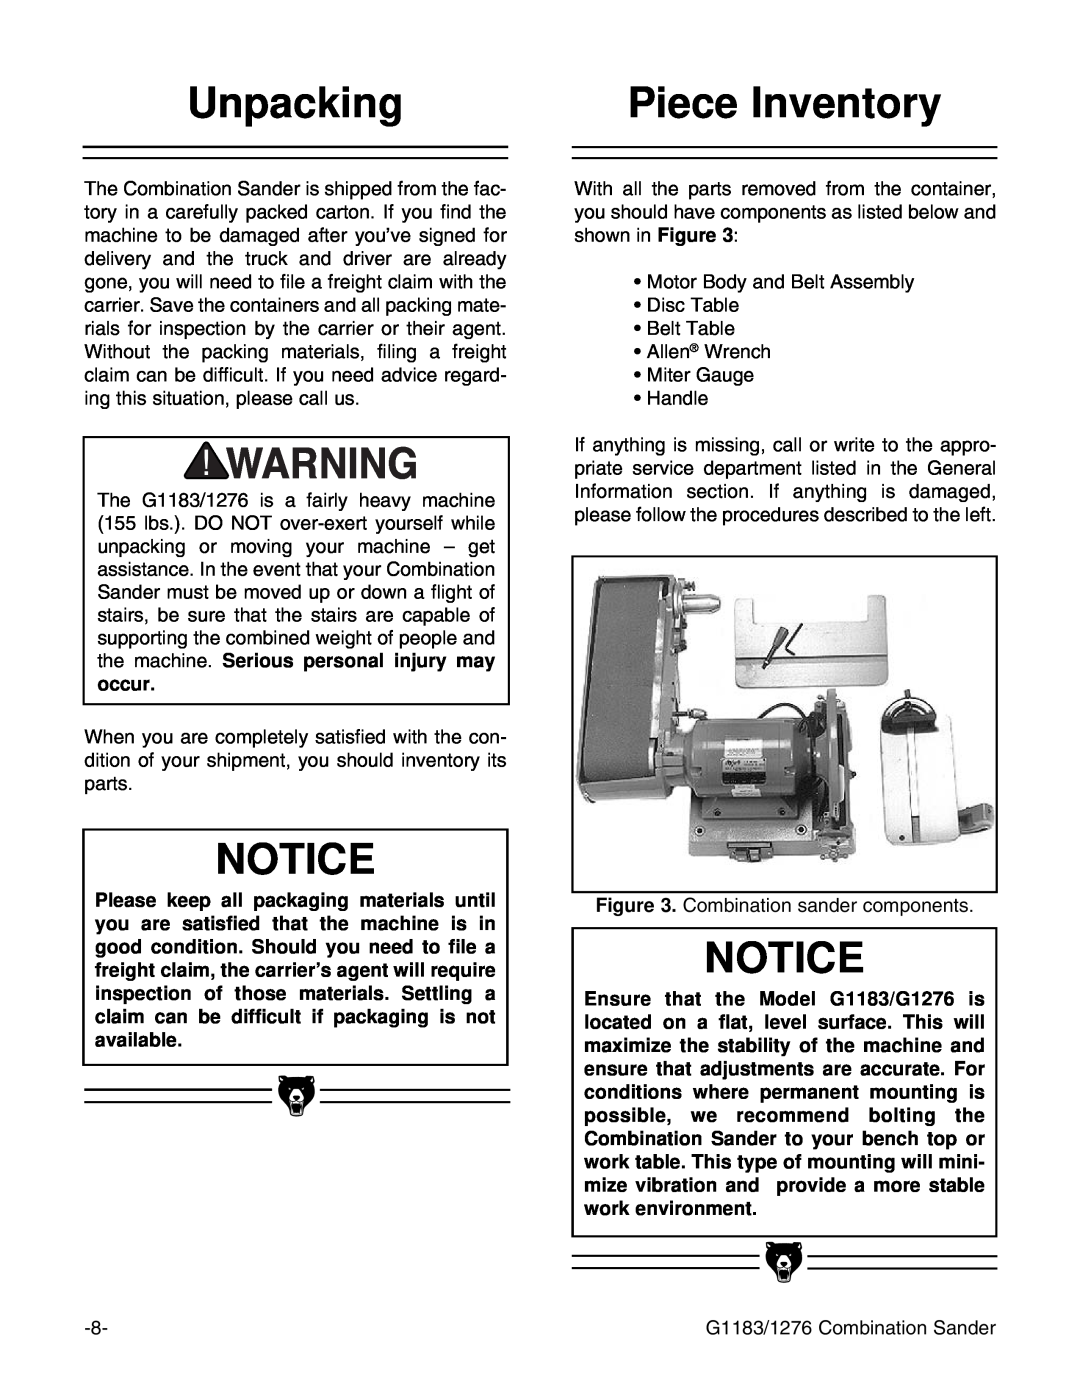 Grizzly G1183, G1276 instruction manual Unpacking, Piece Inventory 